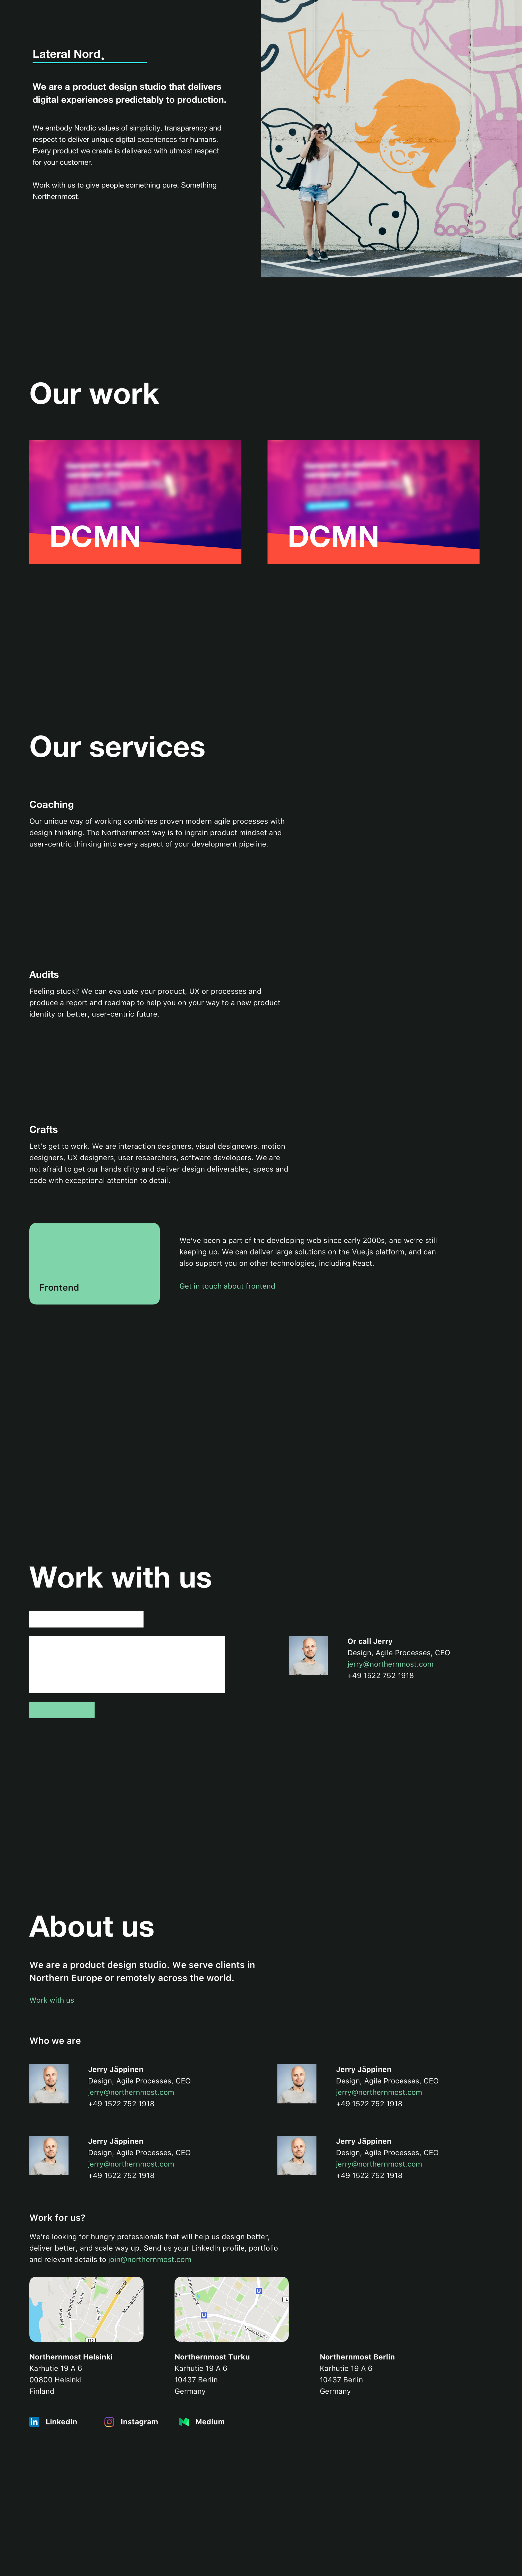 Lateral Nord: Web layout test